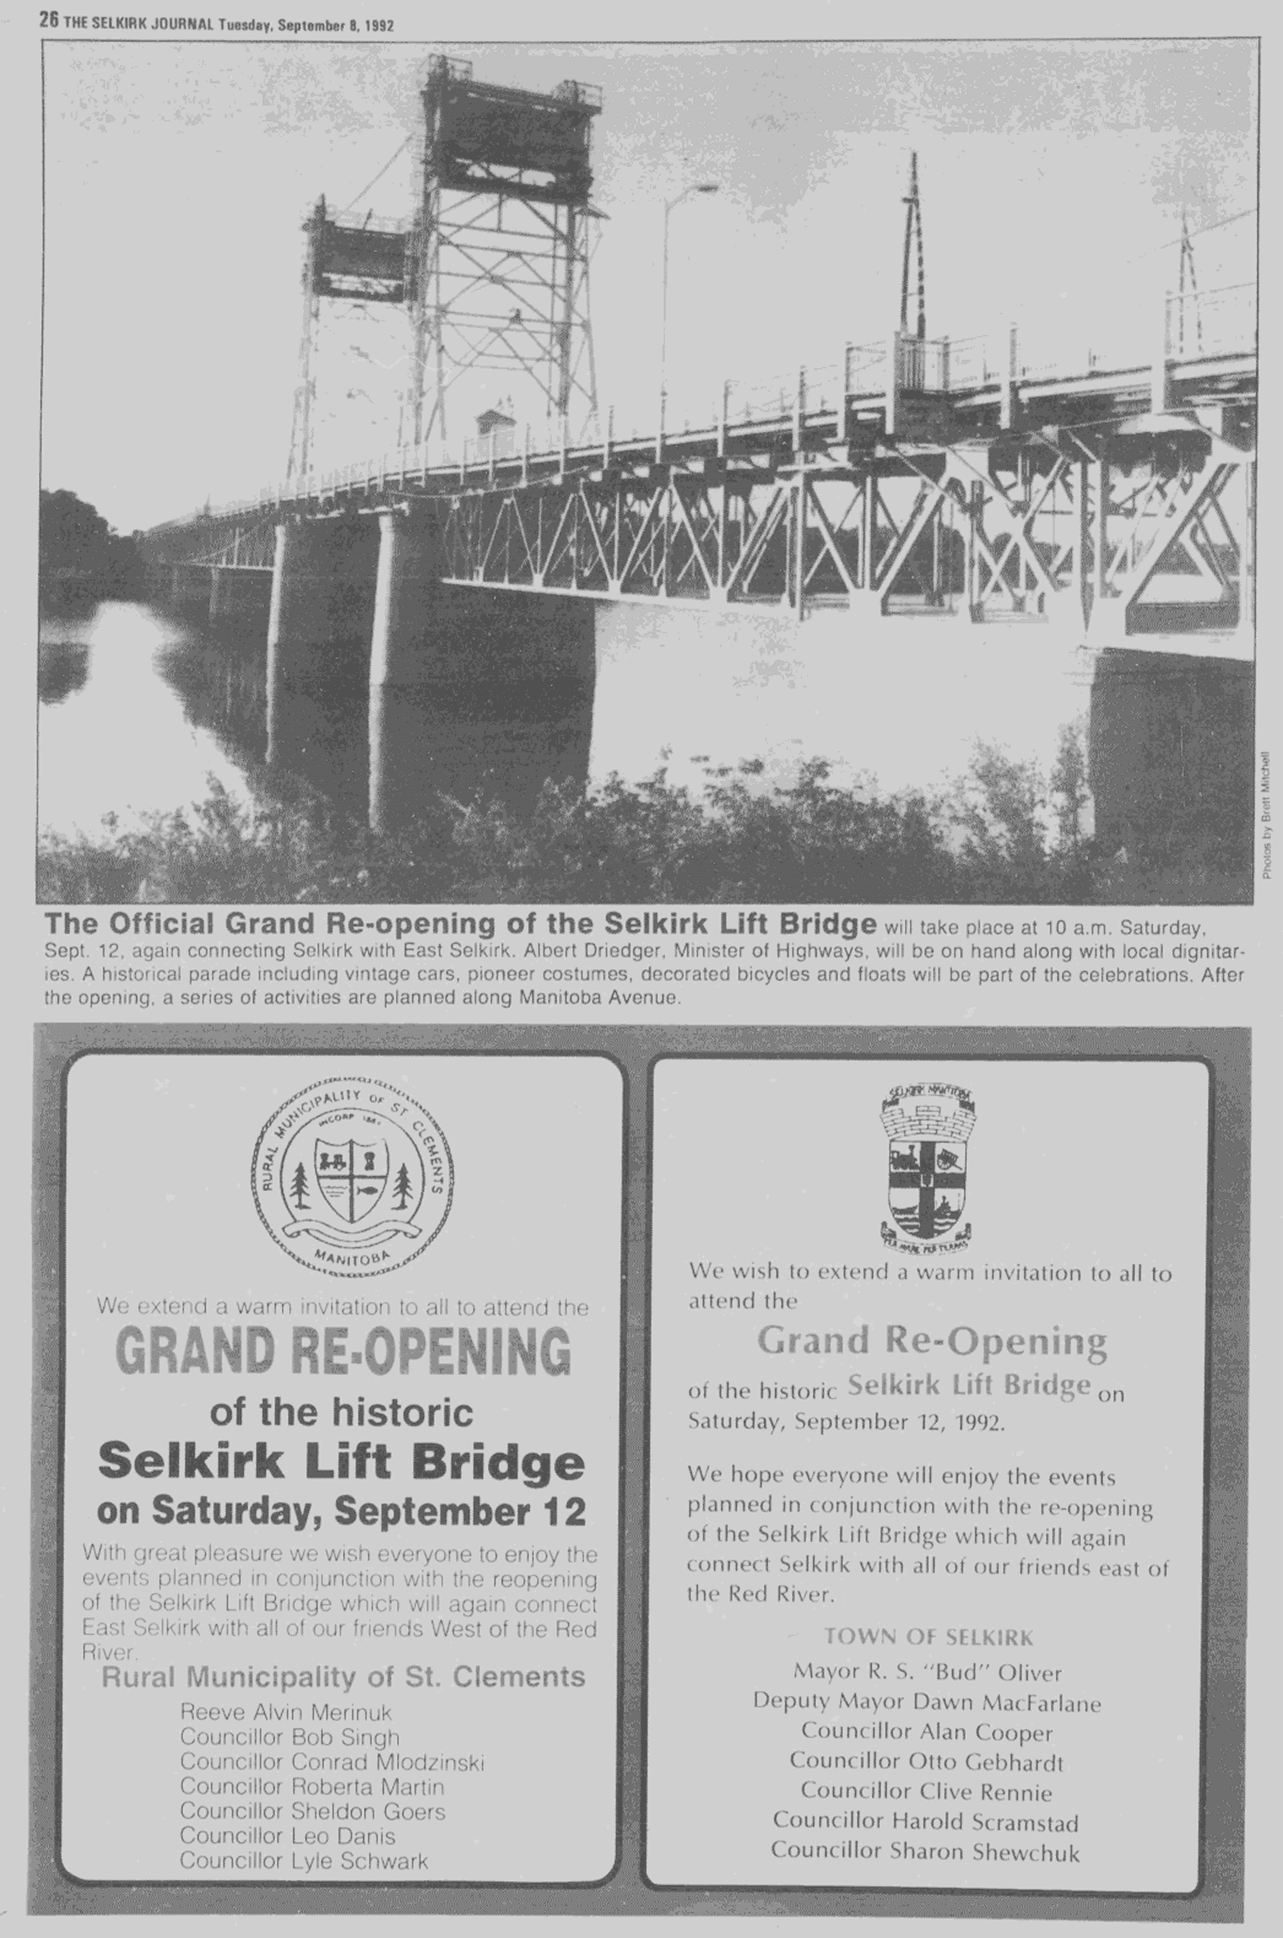 Newspaper article about the reopening of the Selkirk Lift Bridge.